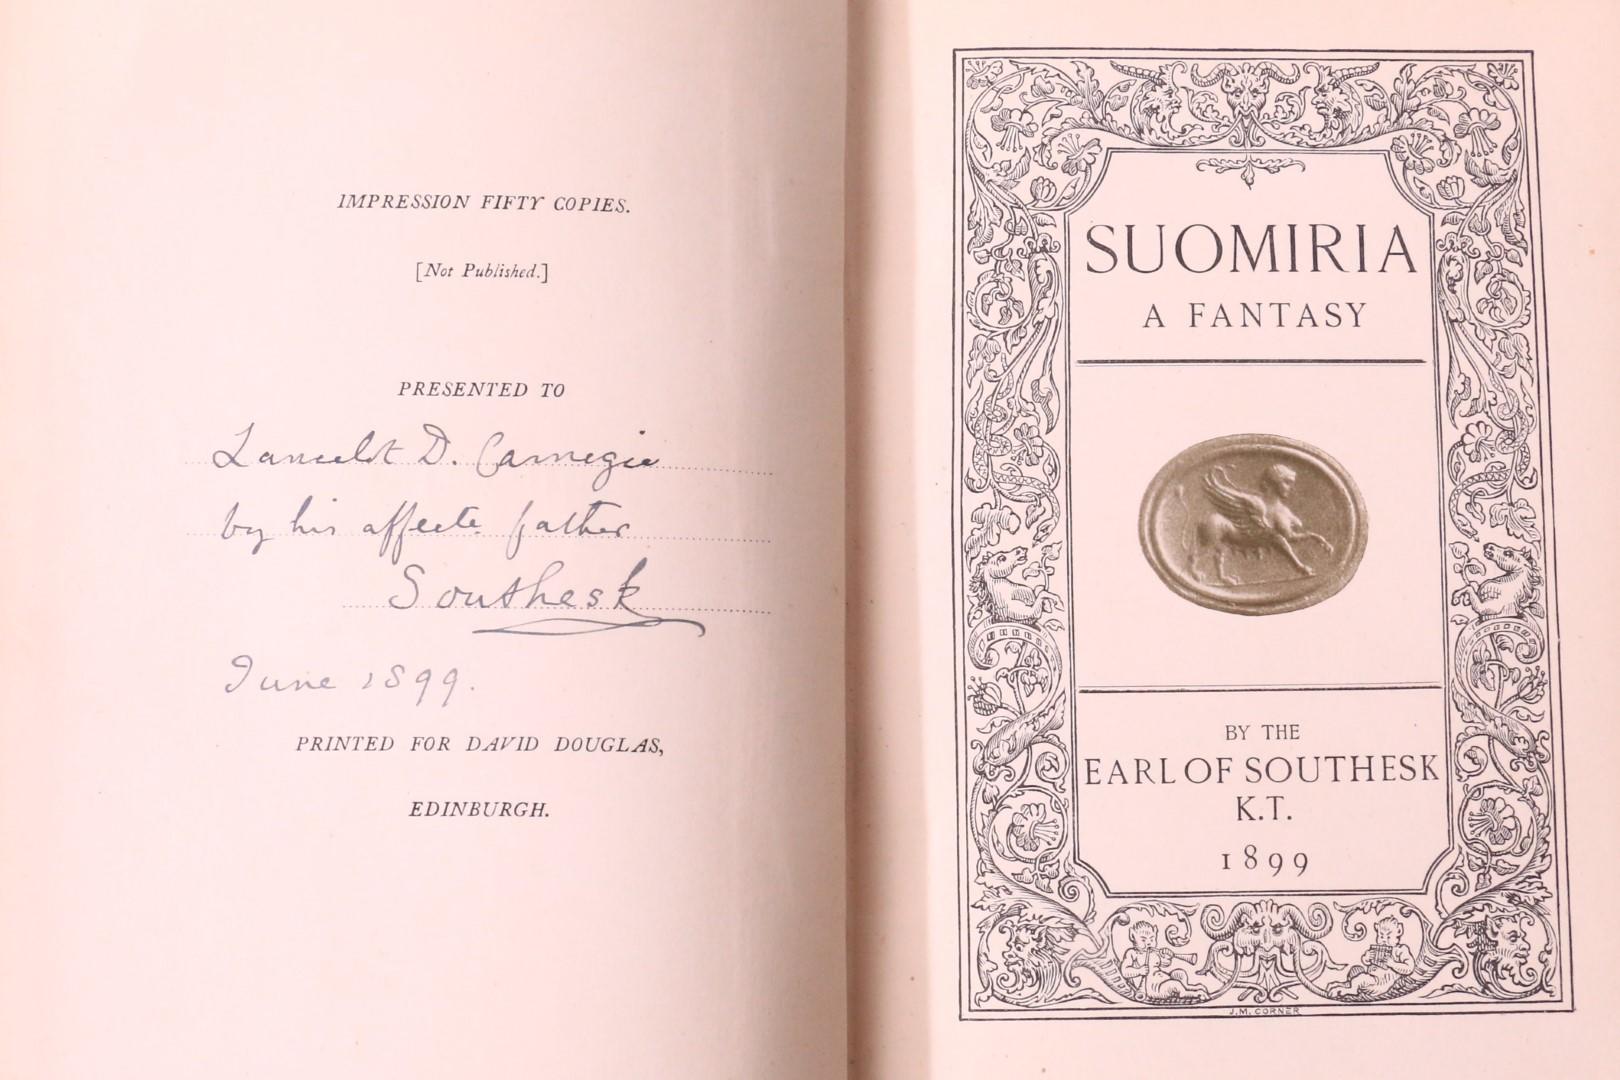 9th Earl of Southesk [James Carnegie] - Suomiria: A Fantasy - David Douglas, 1899, Limited Edition. Signed